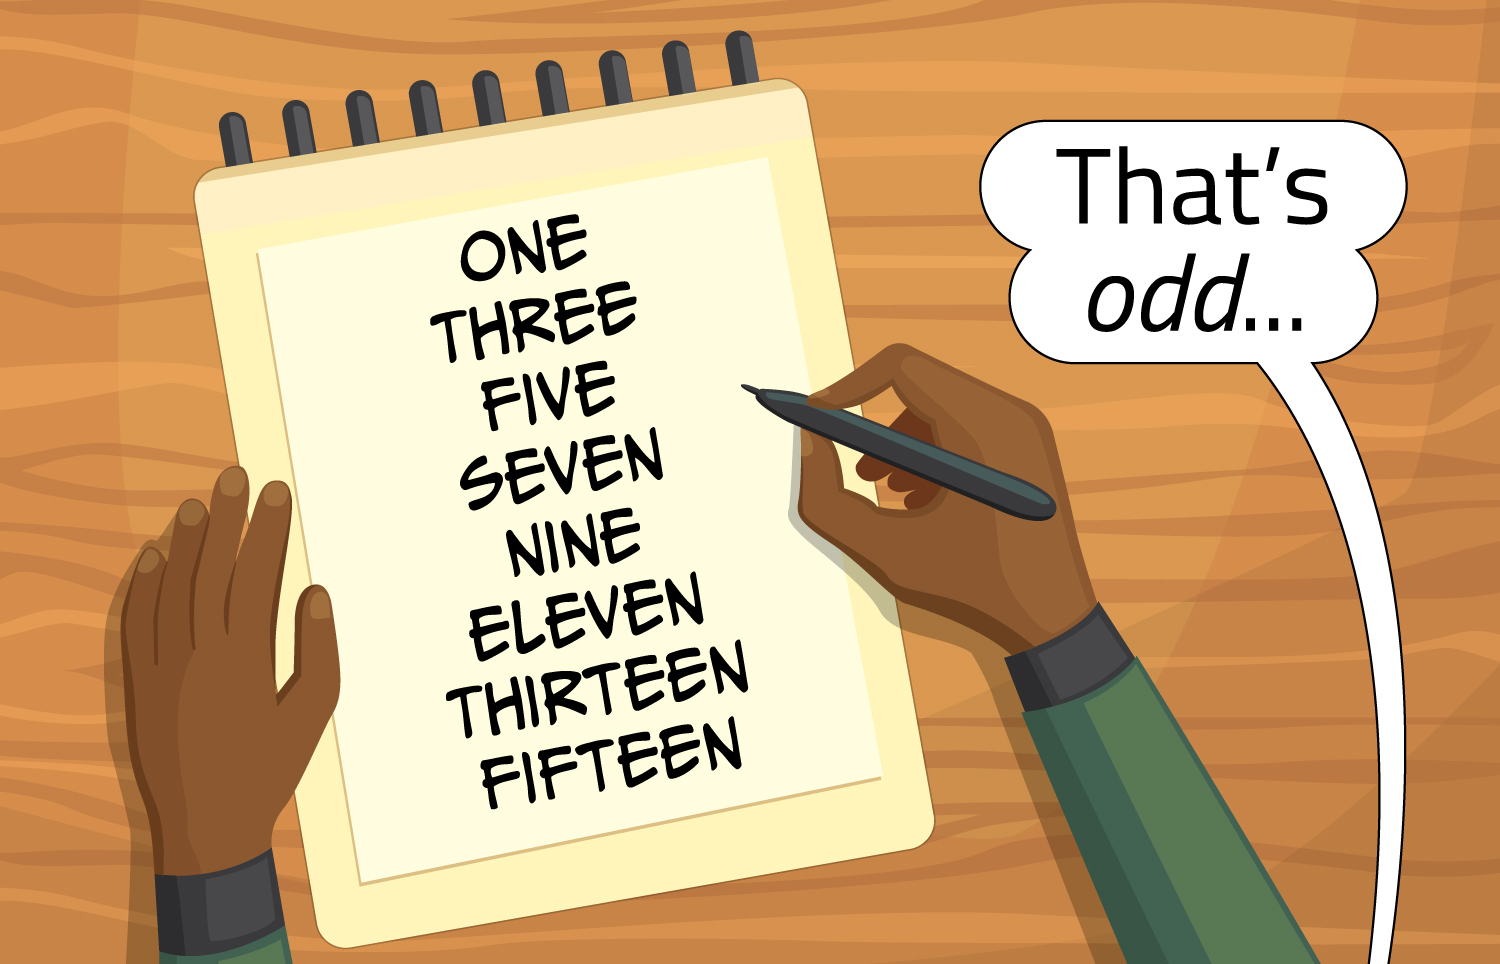 Two hands hold a list of odd numbers up to 15 in a notebook and a speech bubble says “That’s odd.”